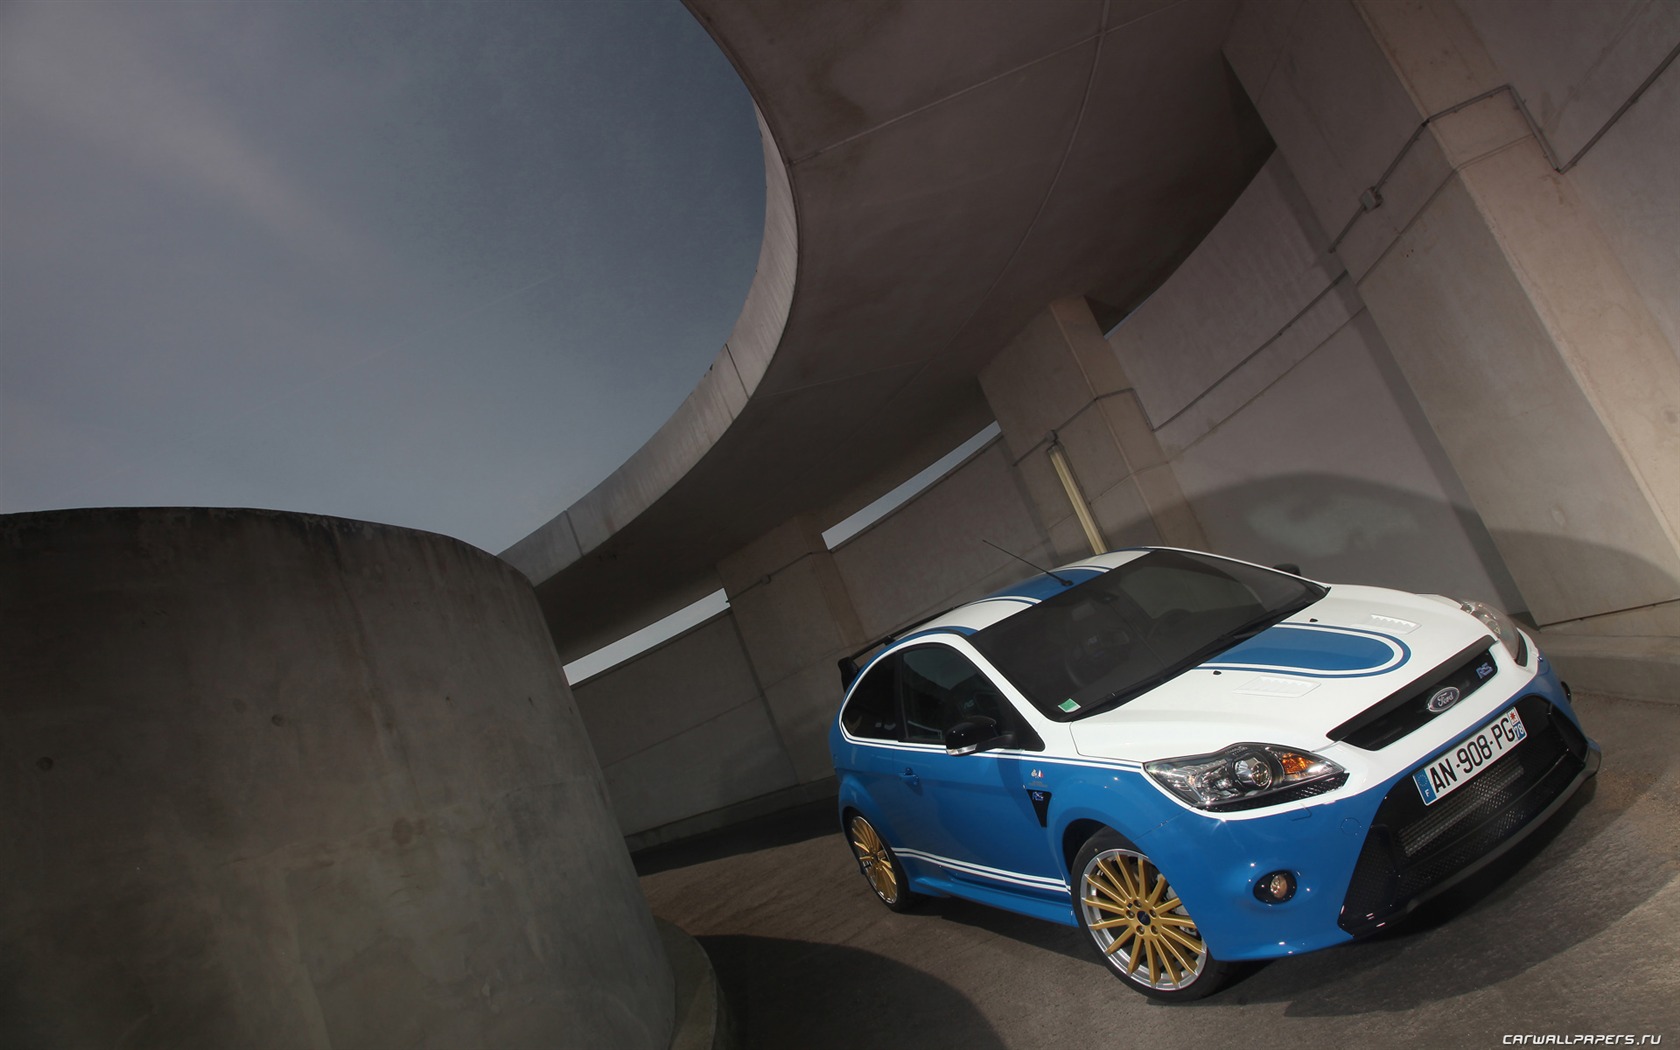 Ford Focus RS Le Mans Classic - 2010 福特4 - 1680x1050